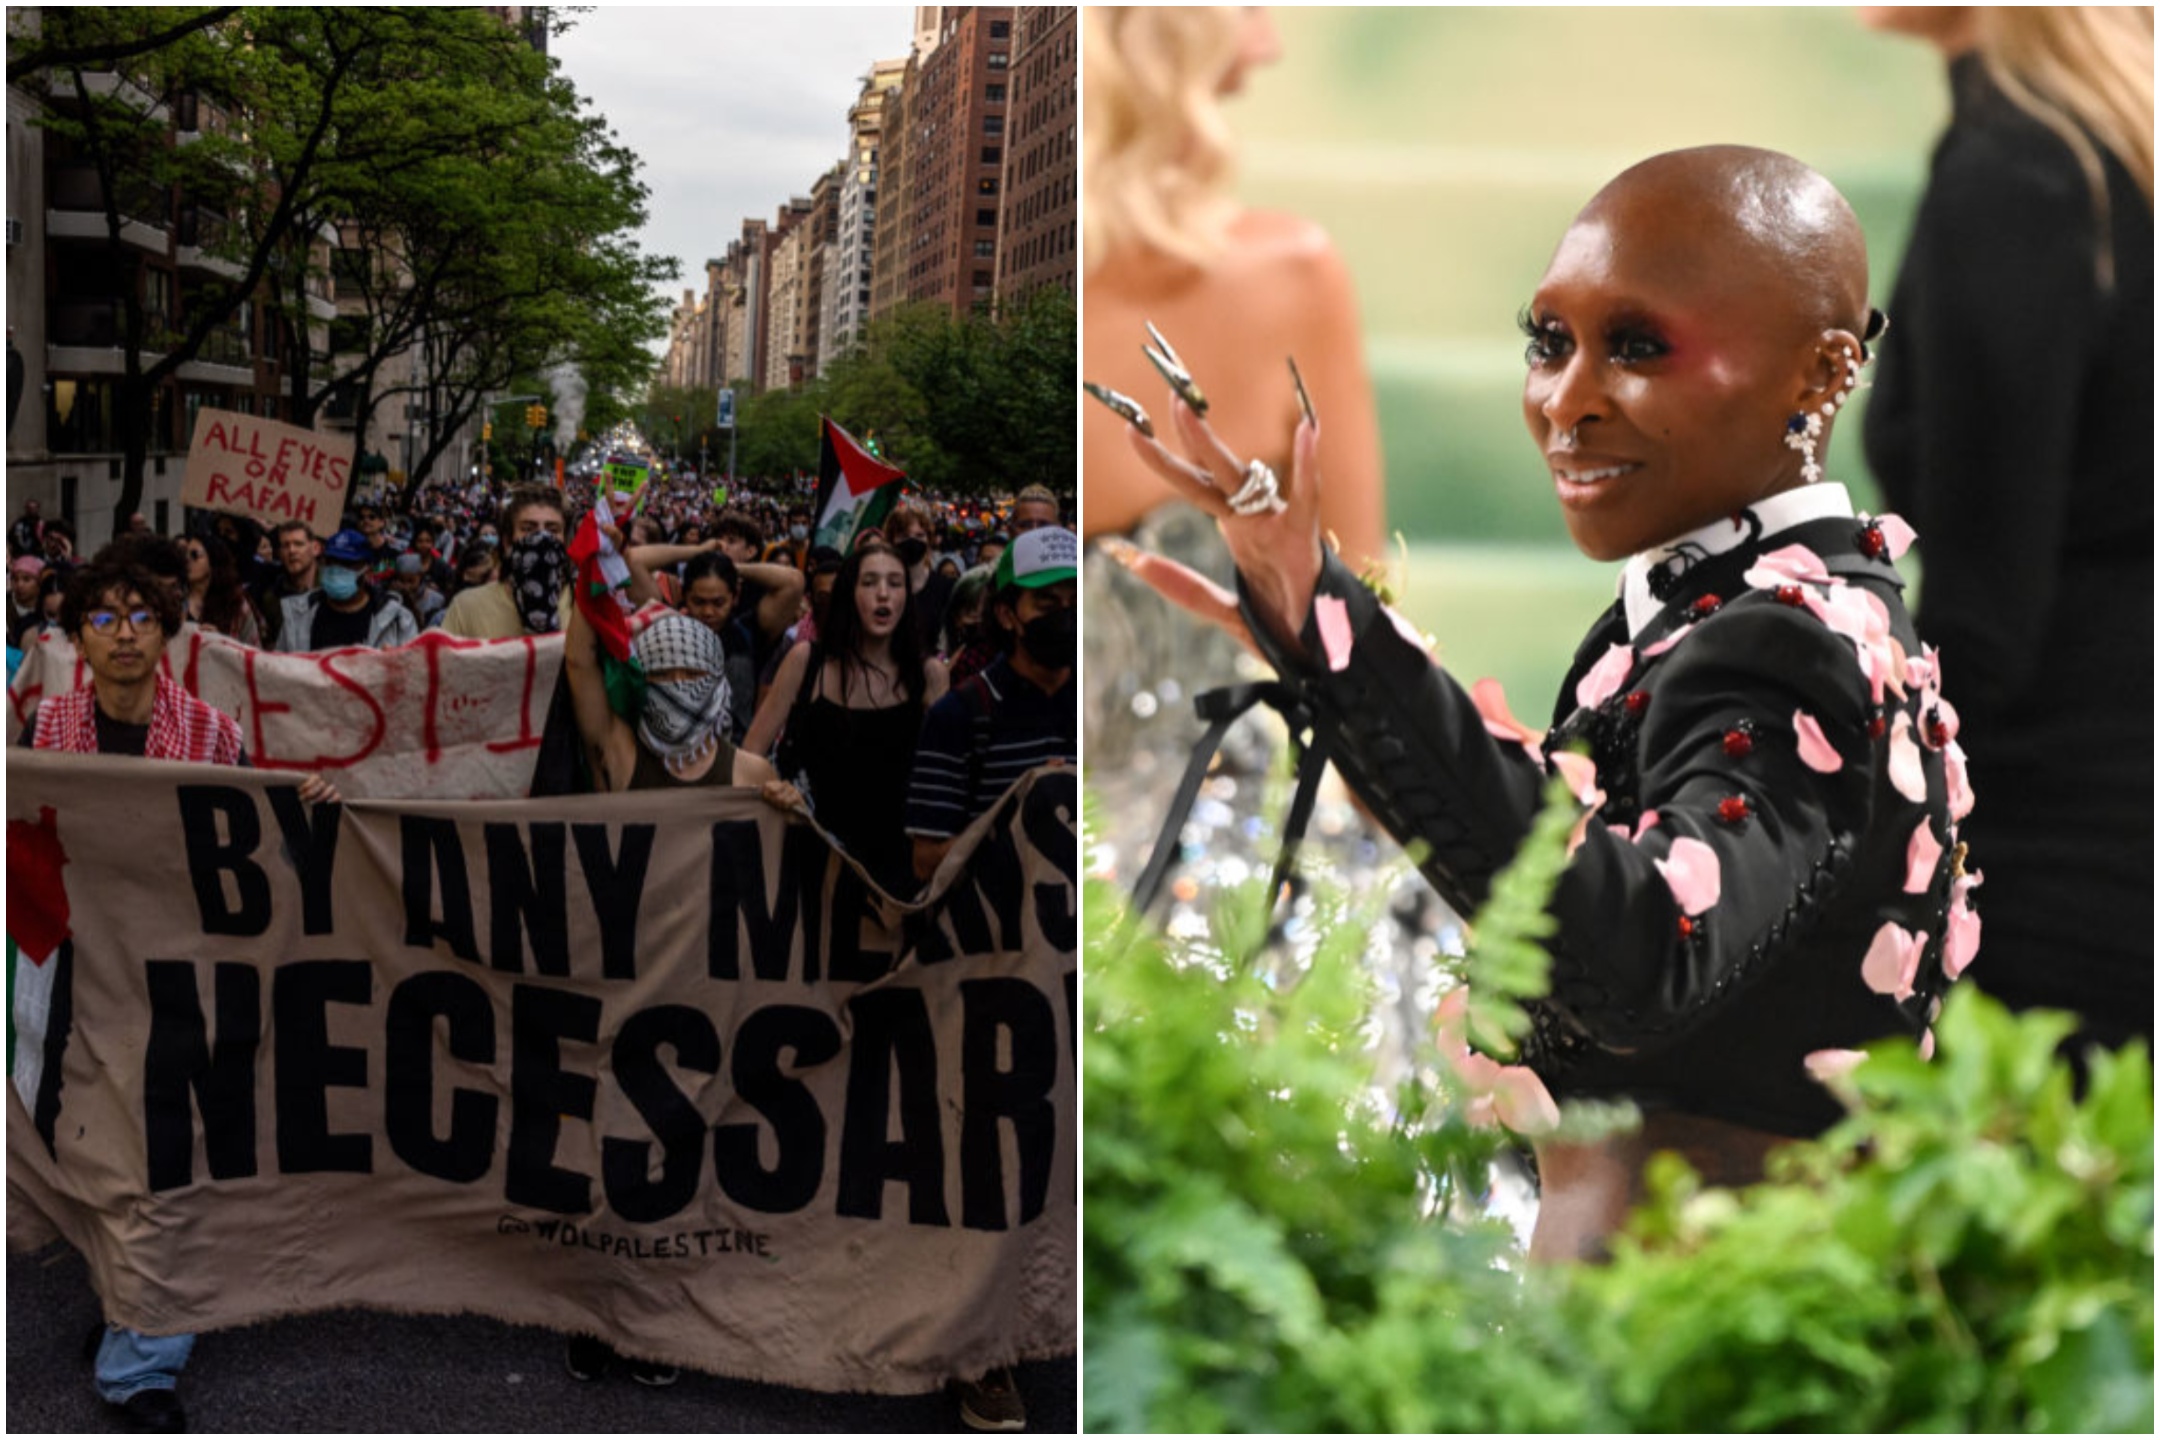 The Met Gala Faces Backlash from Activists